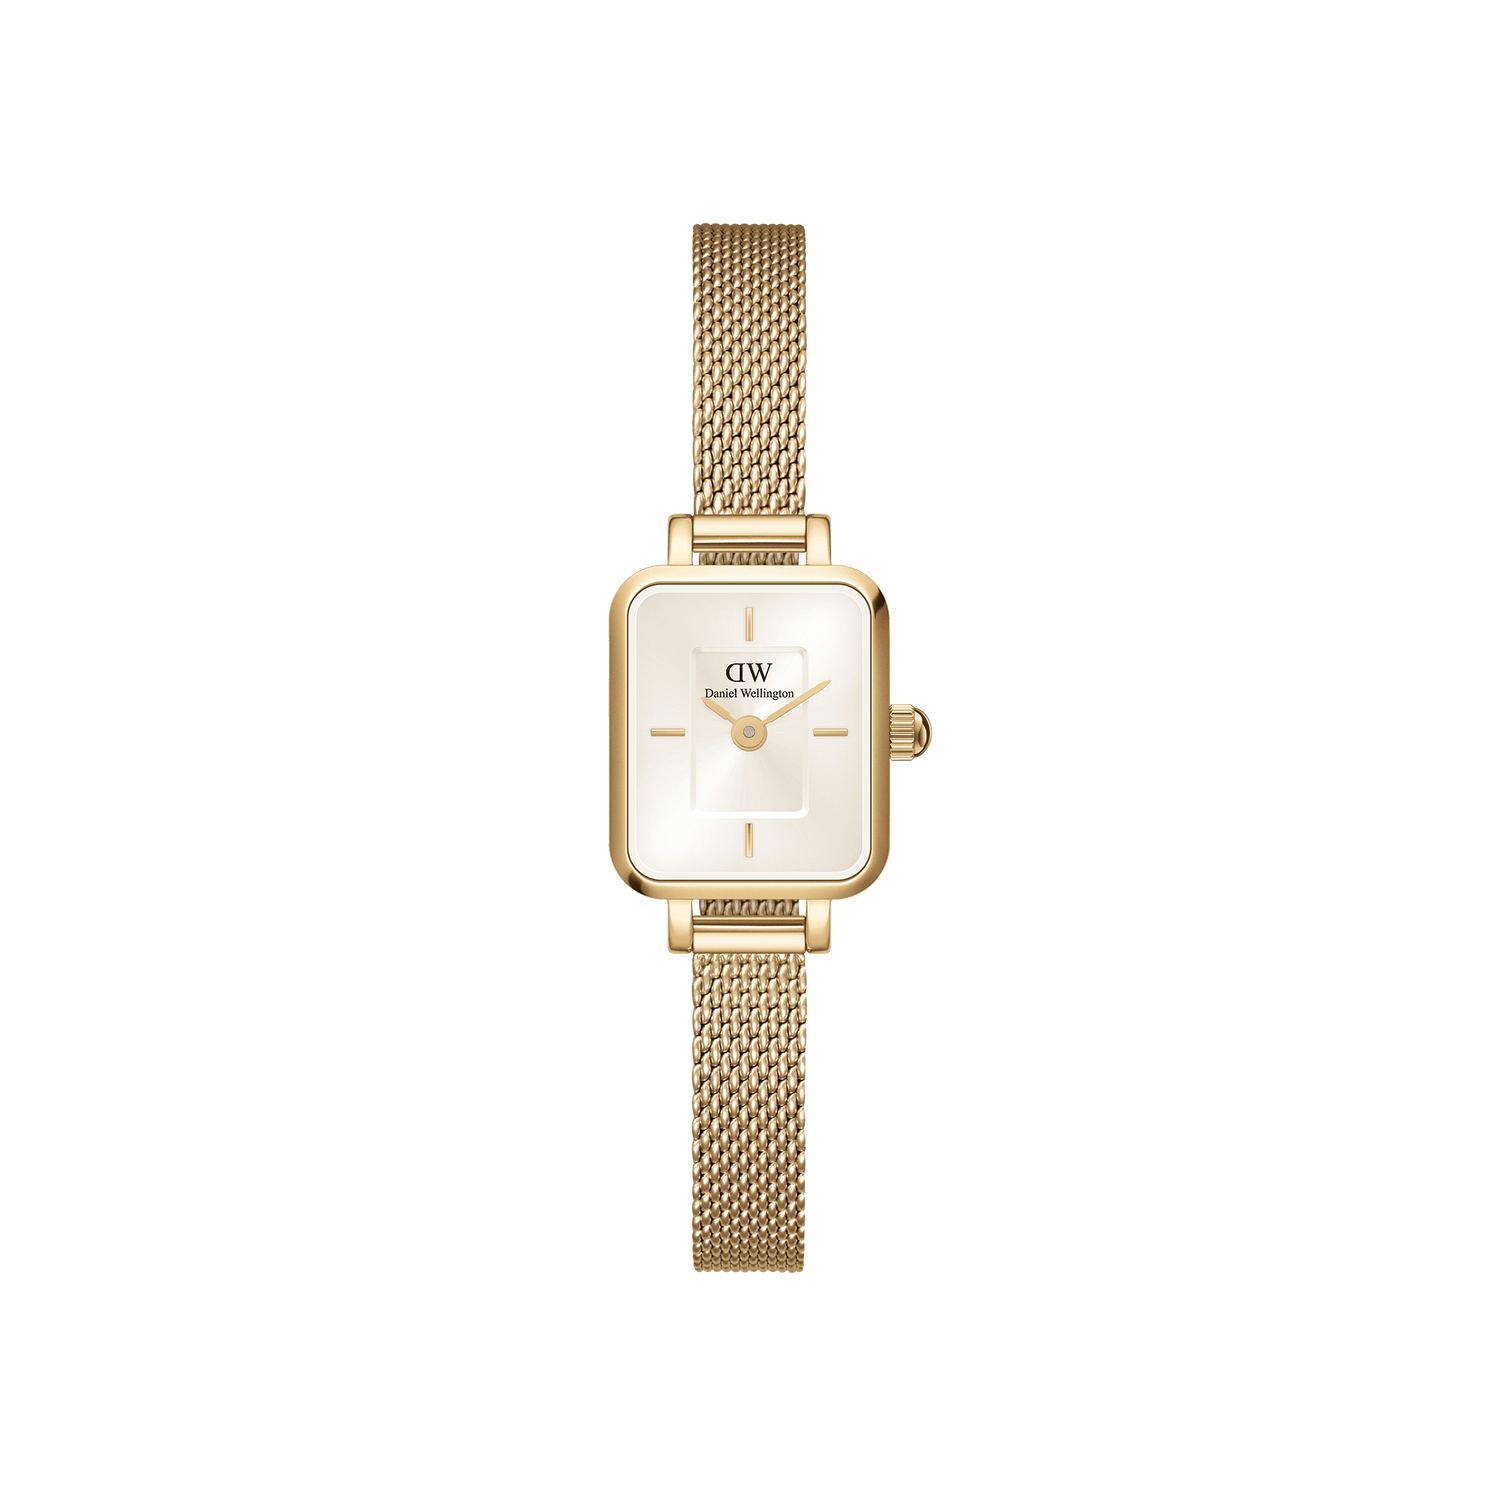 Watches - Shop Gold and Silver Accessories Online | DW US